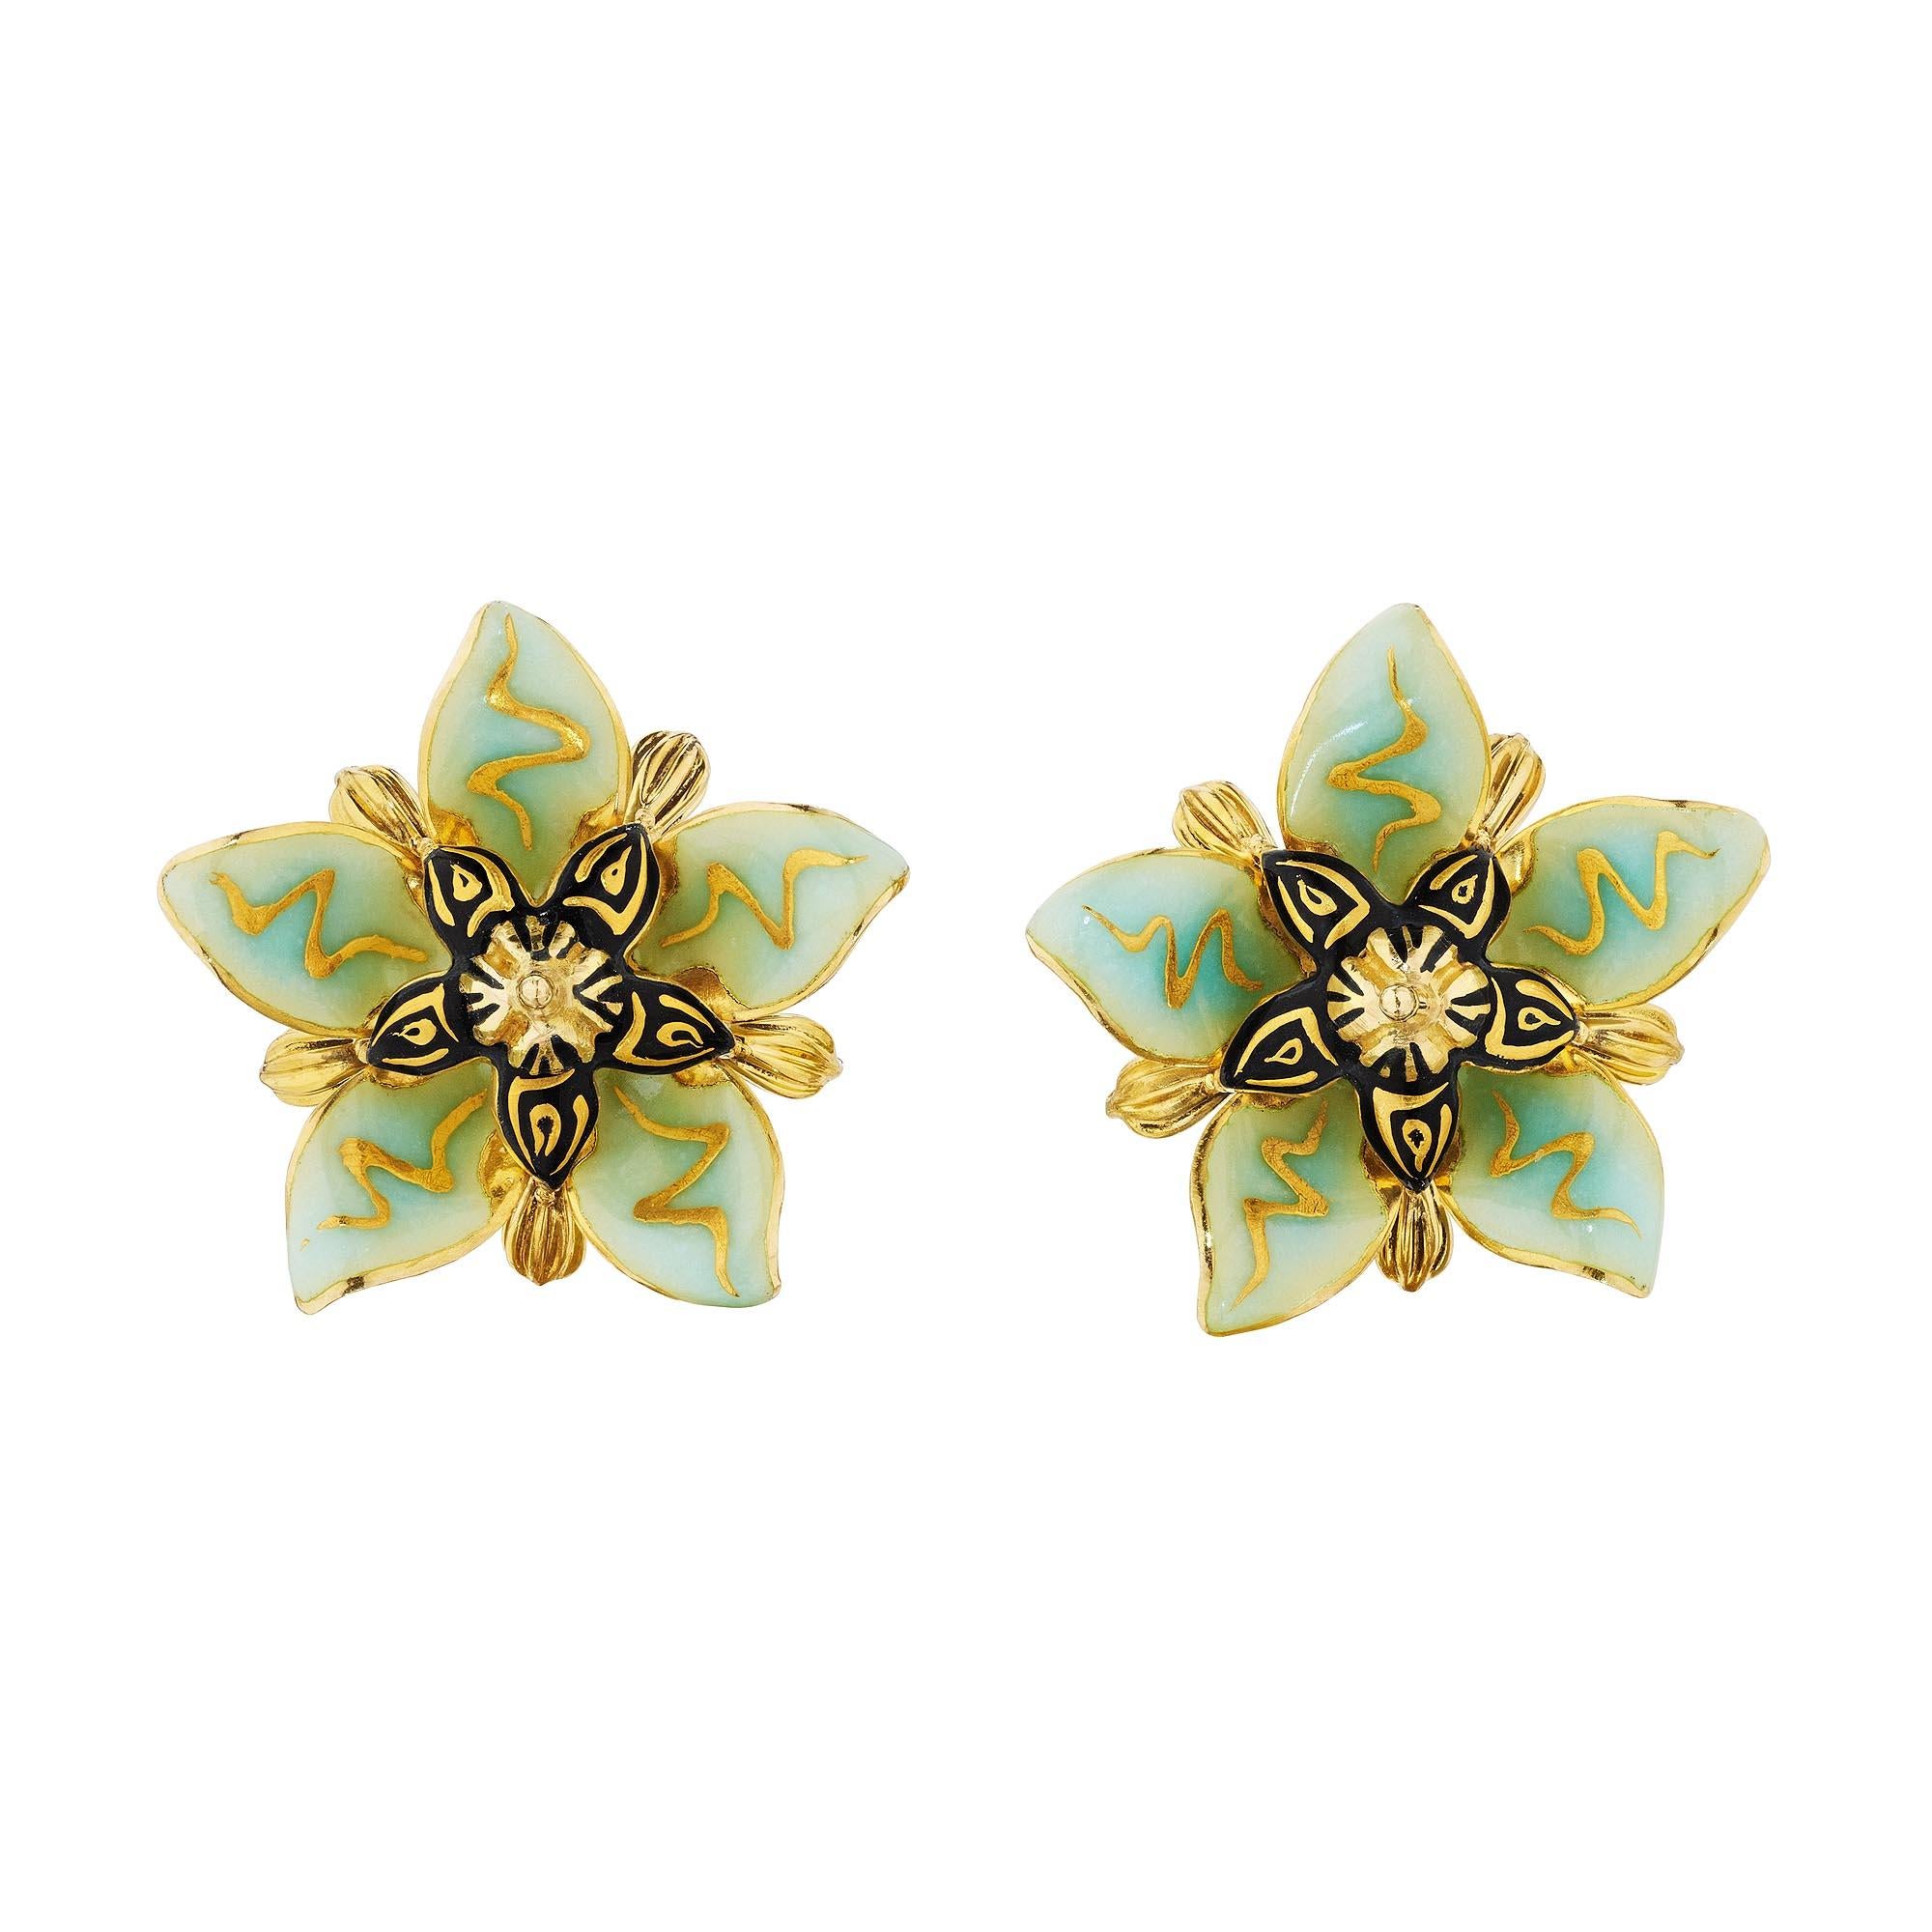 Live life in full bloom with these incredibly detailed Otto Jakob 'Stapelia' diamond, gold, and enamel vintage floral earrings. Fragrantly realistic and masterfully crafted, these collectible earrings are as beautiful as Mother Nature intended.